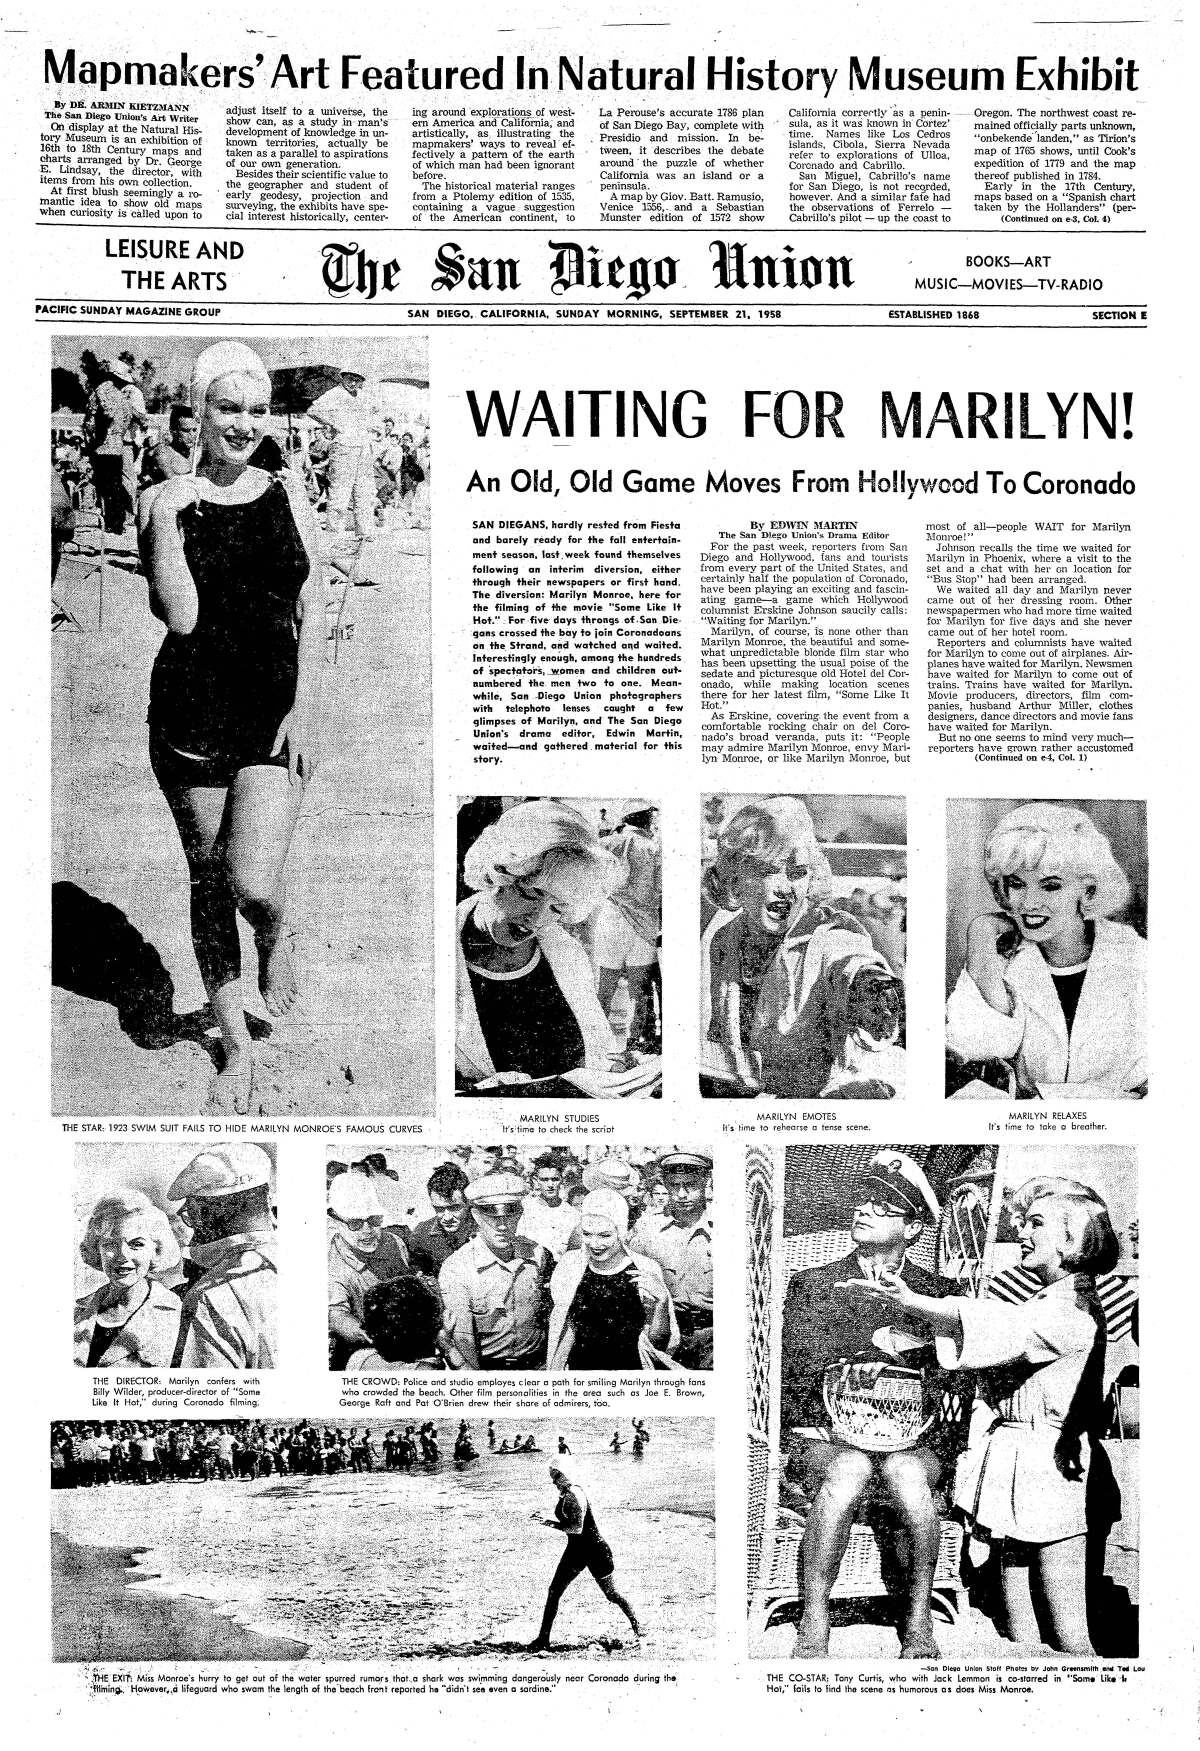 "Waiting for Marilyn!" photo page from The San Diego Union published Sept. 21, 1958.